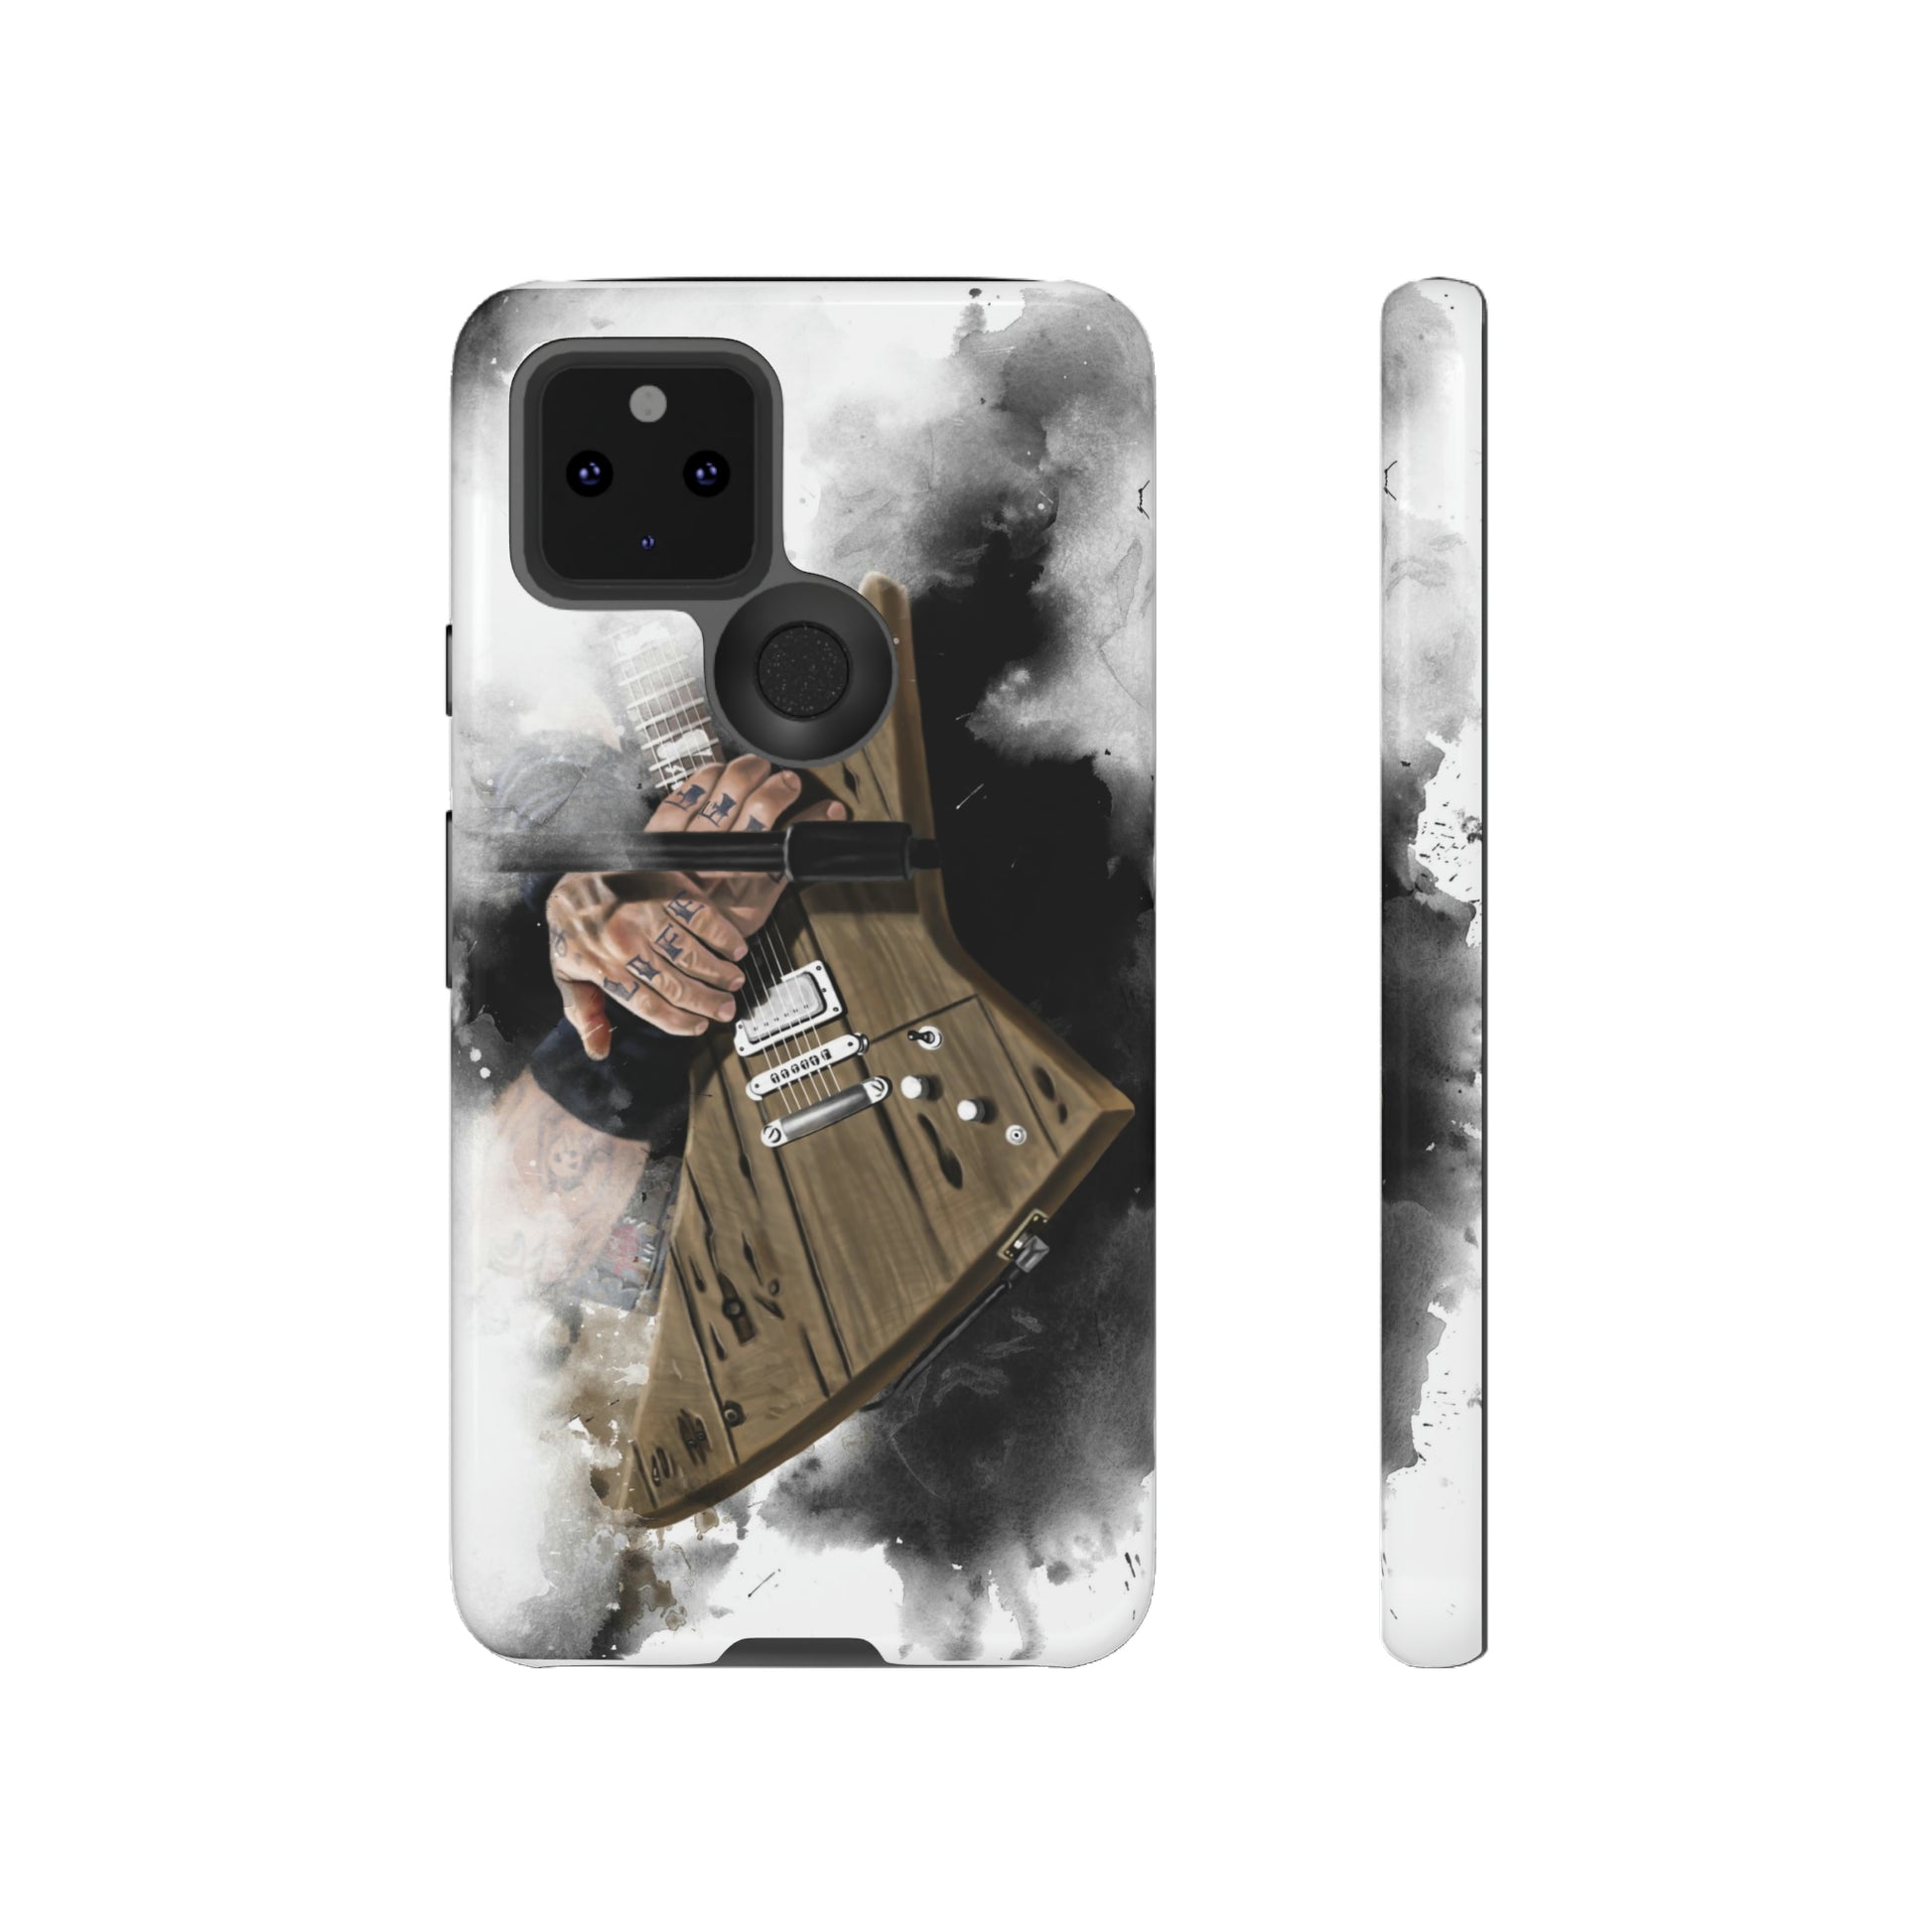 Digital painting of a brown electric guitar with hands printed on a google phone case